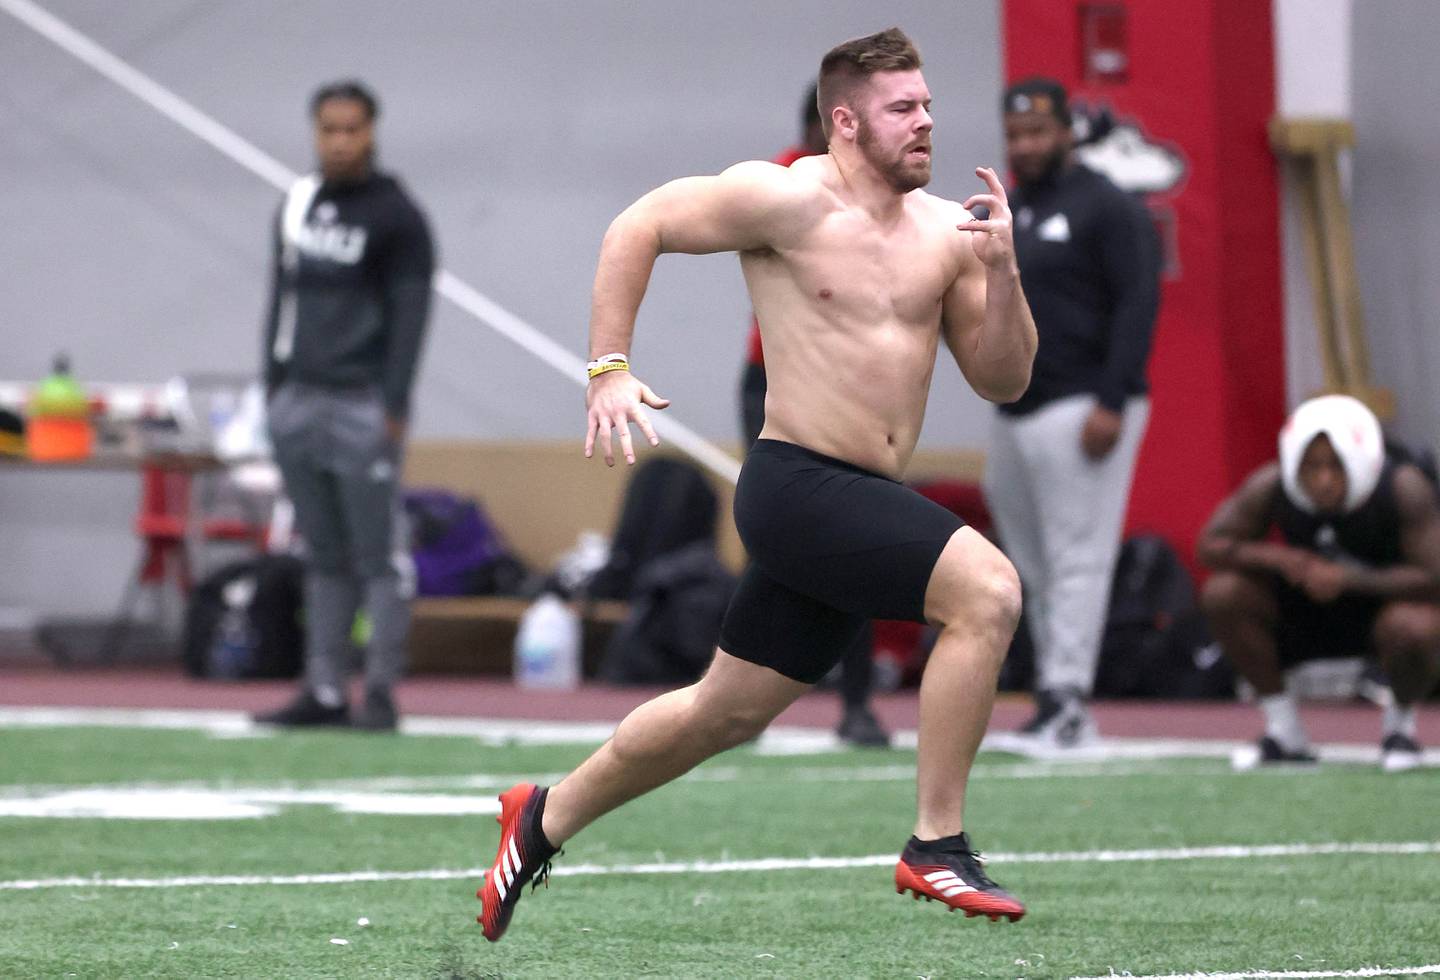 Former Northern Illinois University running back Clint Ratkovich runs the 40-yard dash Wednesday, March 30, 2022, during pro day in the Chessick Practice Center at NIU. Several NFL teams had scouts on hand to evaluate the players ahead of the upcoming draft.